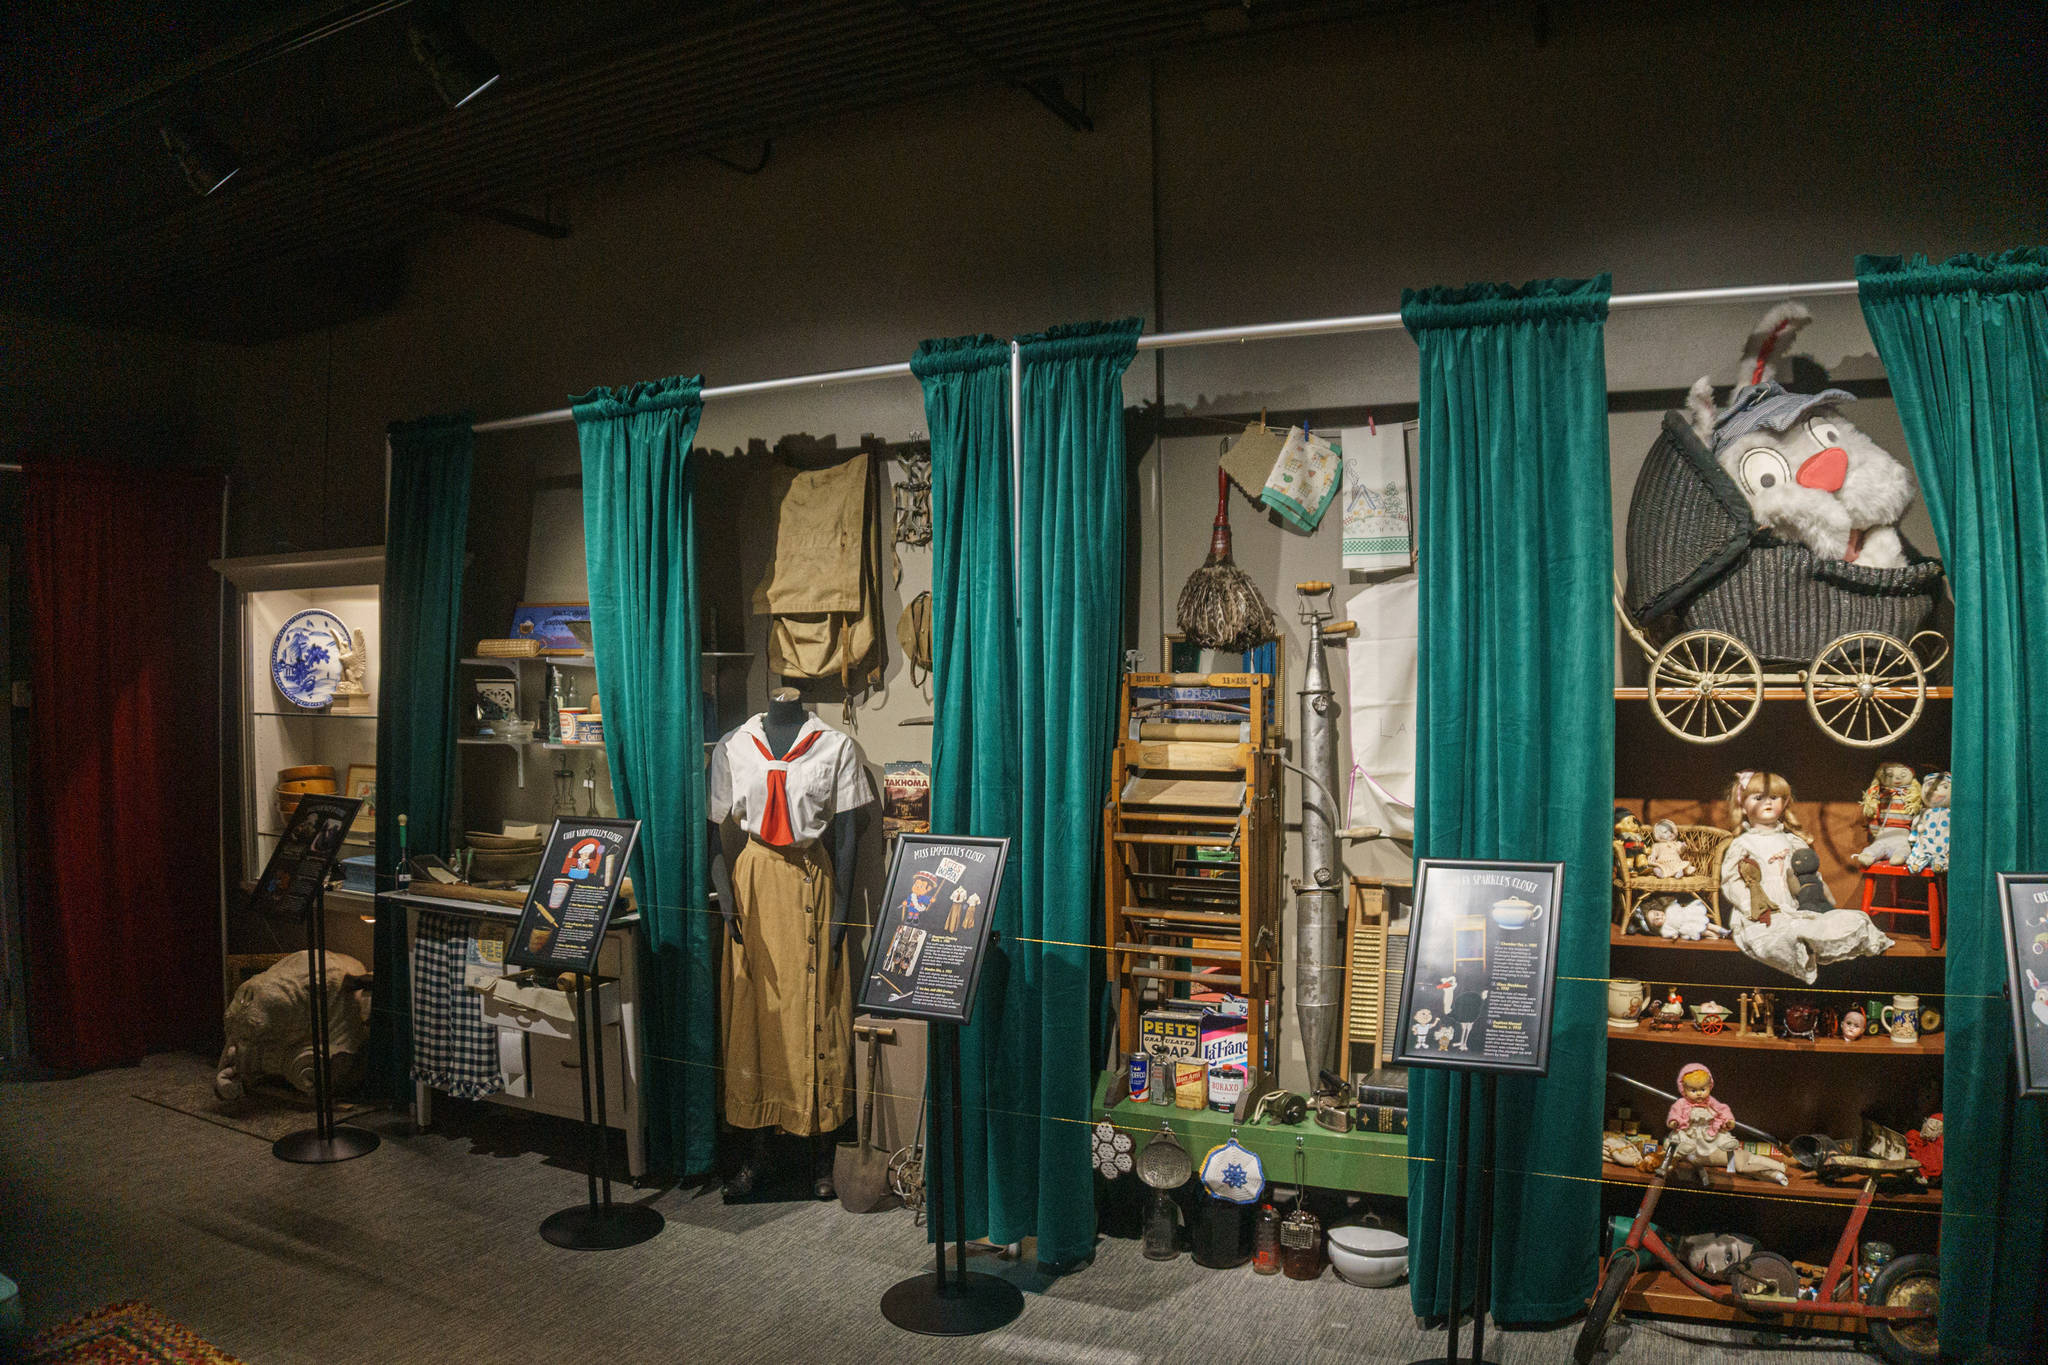 Closets of Curiosity, the newest exhibit featured at the White River Valley Museum in Auburn, photo taken July 1, 2021. 	Photo by Henry Stewart-Wood